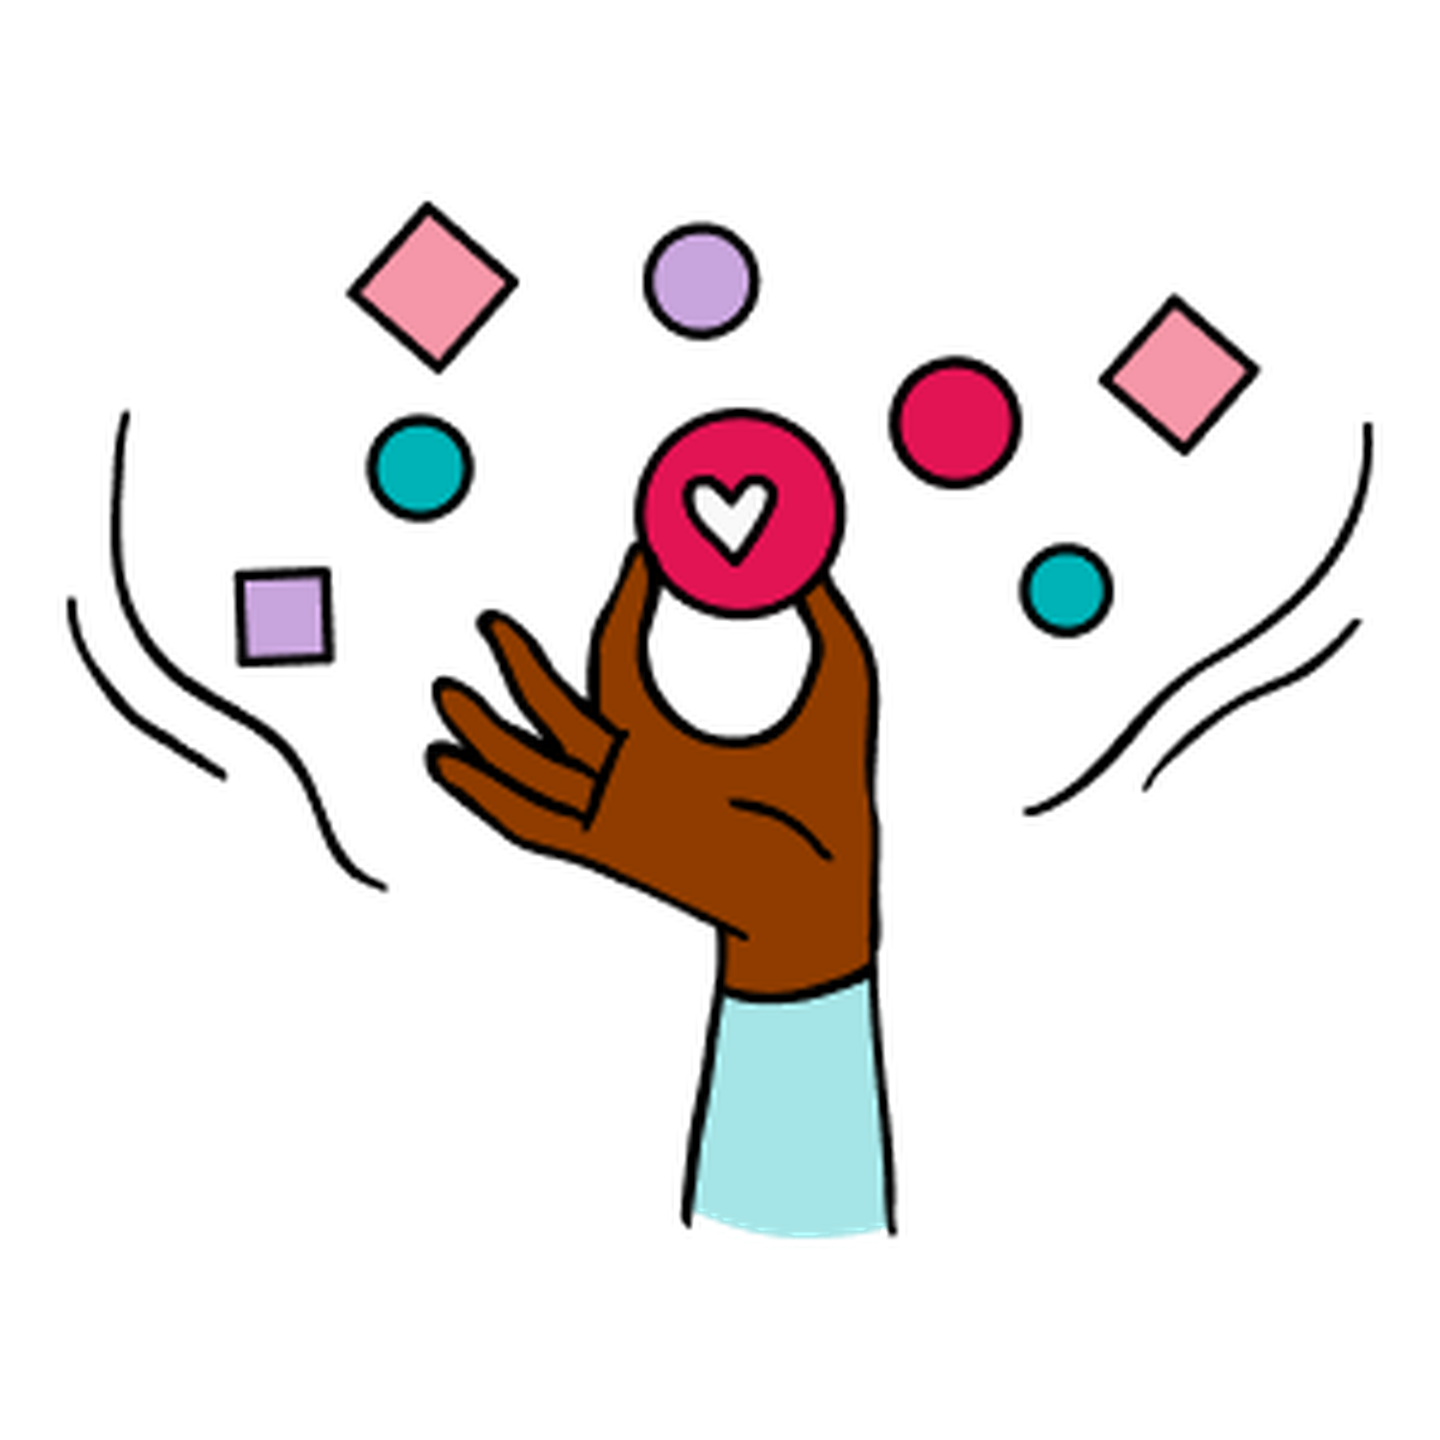 Illustration of a hand reaching for a heart in a circle amidst floating brightly coloured shapes